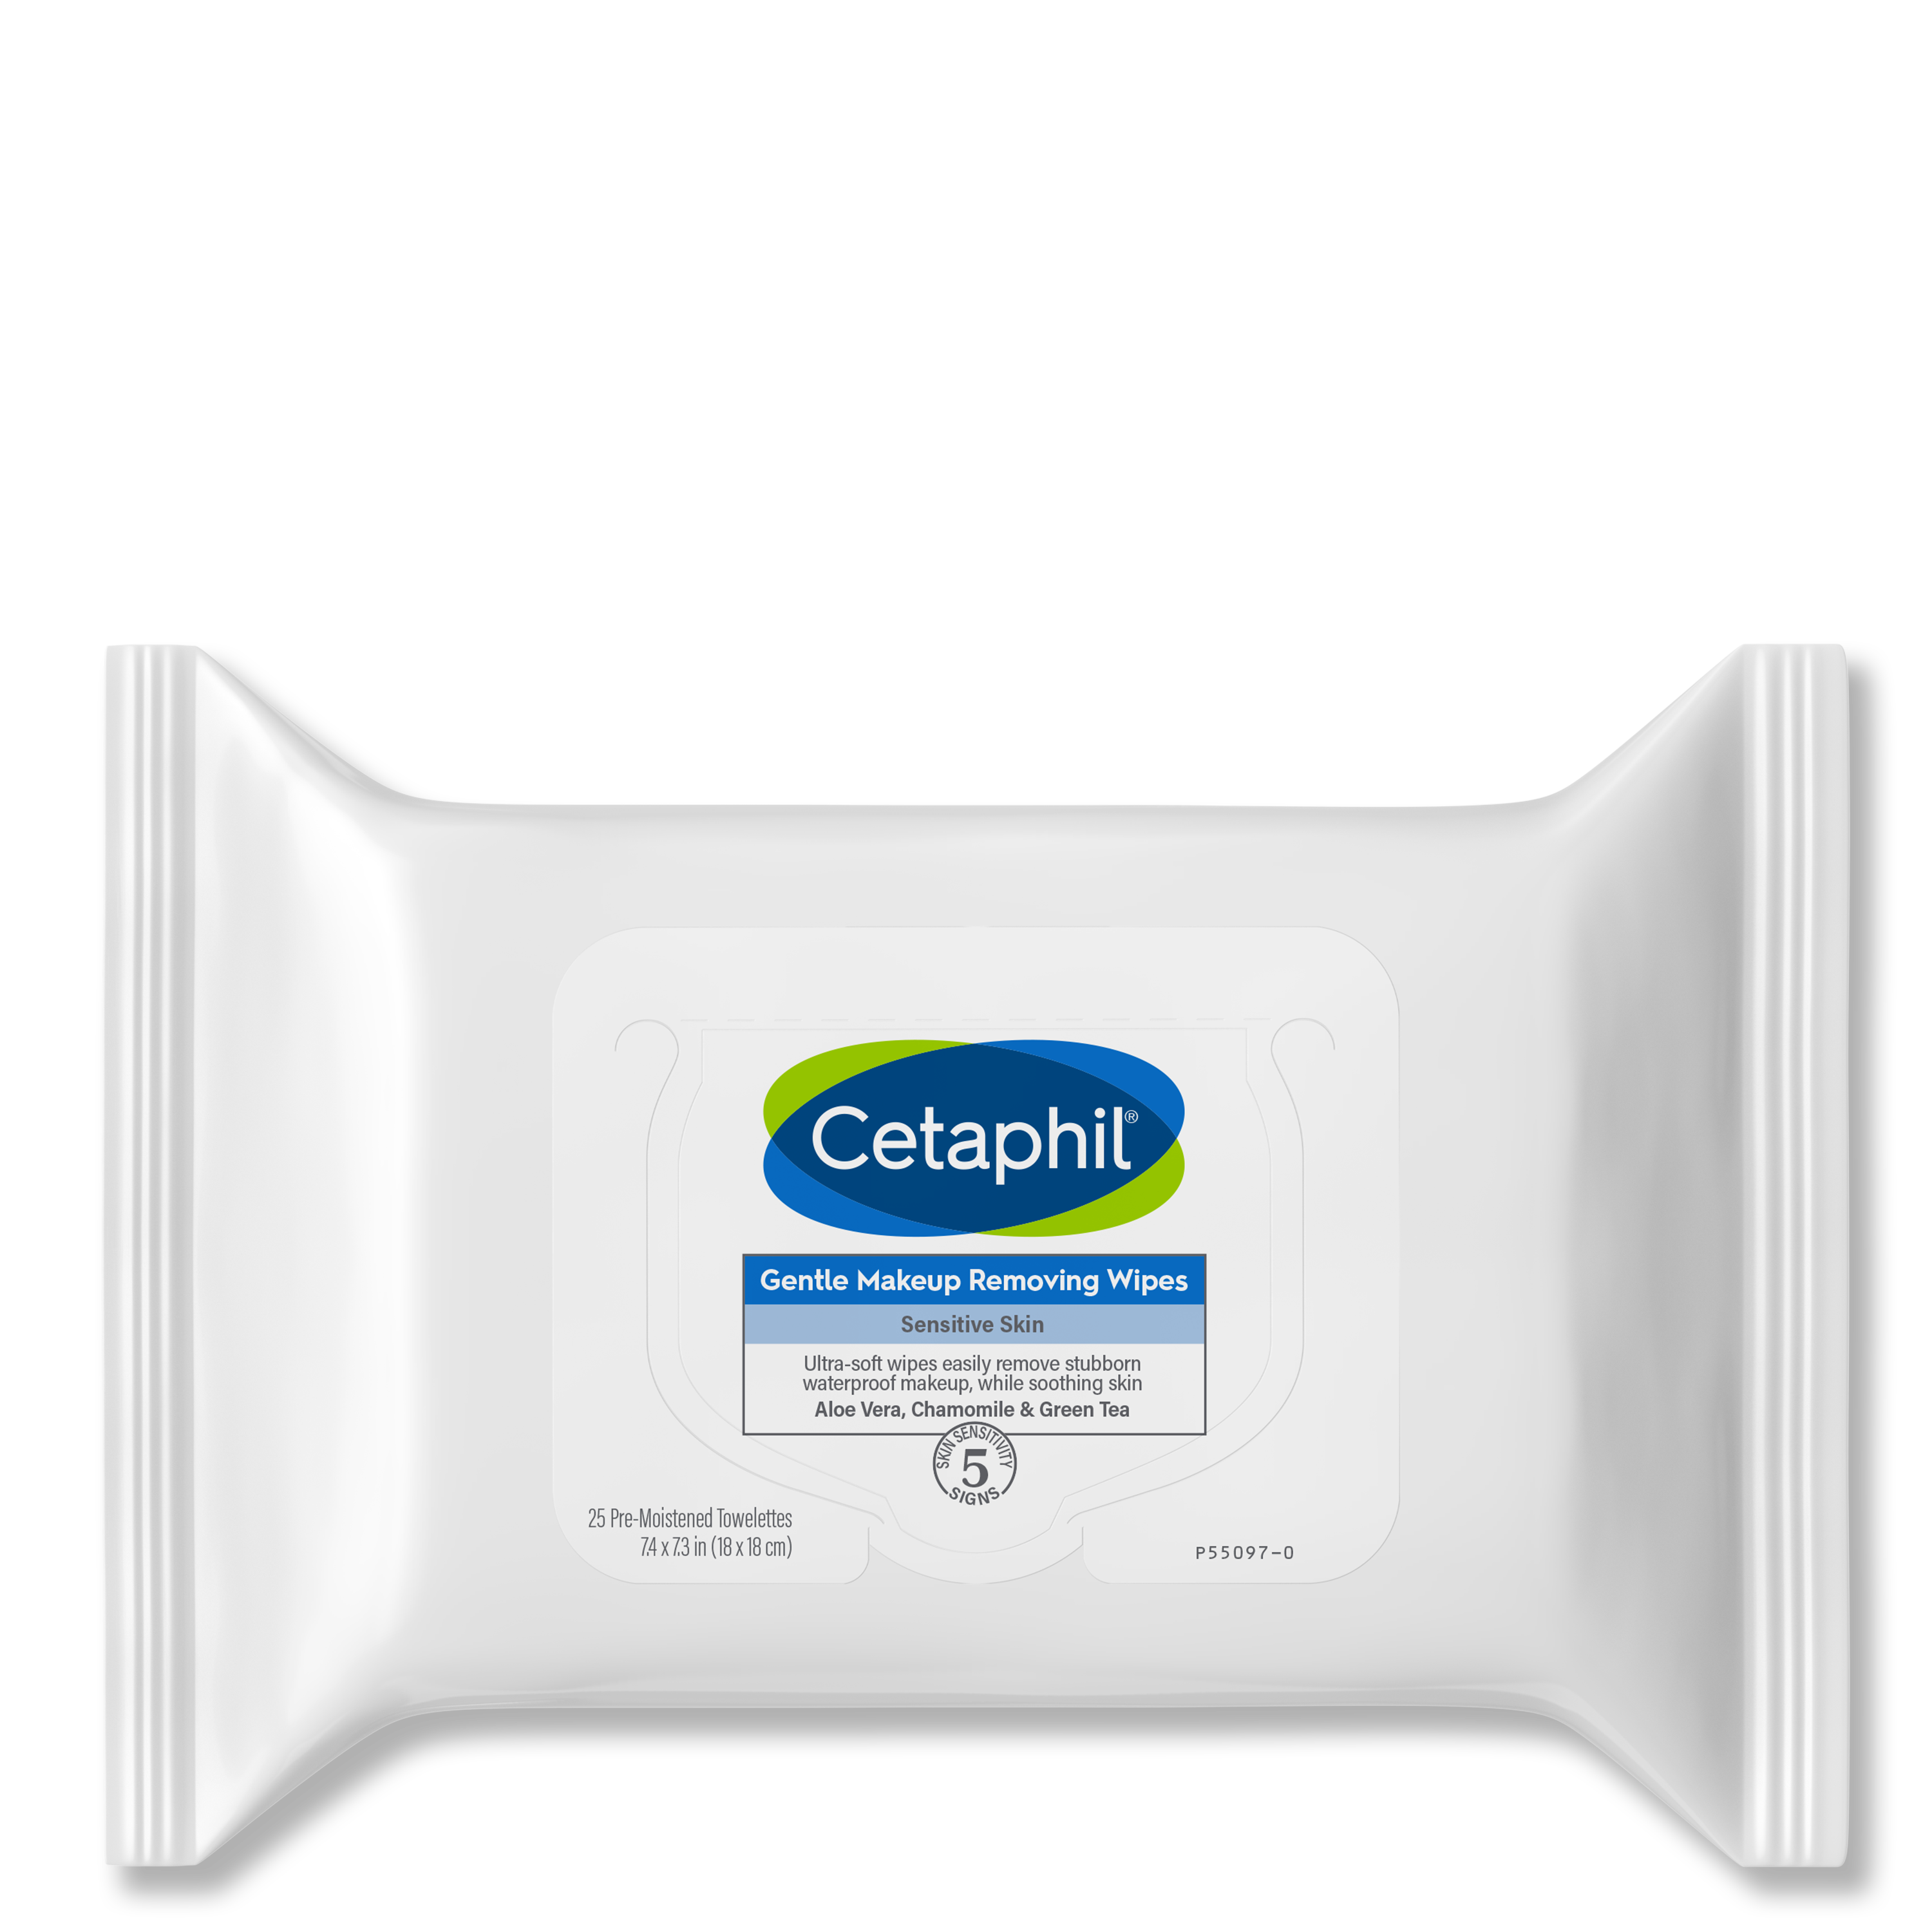 Cetaphil Gentle Makeup Removing Face Wipes, Daily Cleansing Facial Towelettes Gently Remove Makeup, Fragrance and Alcohol Free, 25 Count Makeup Remover Wipes